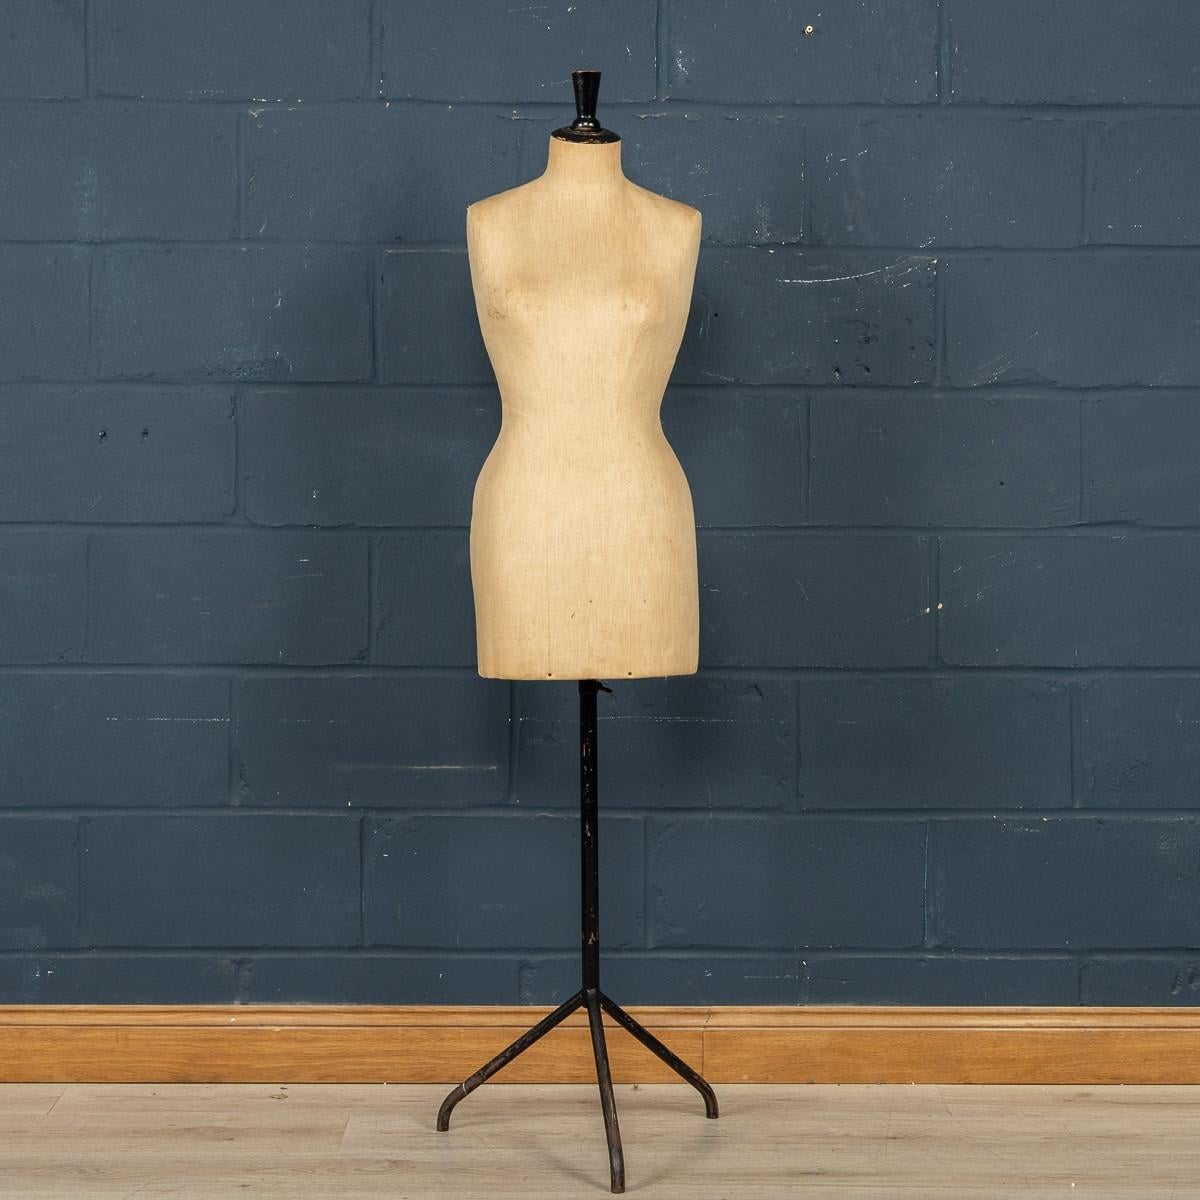 Steel 20th Century French Shop Mannequin, c.1910